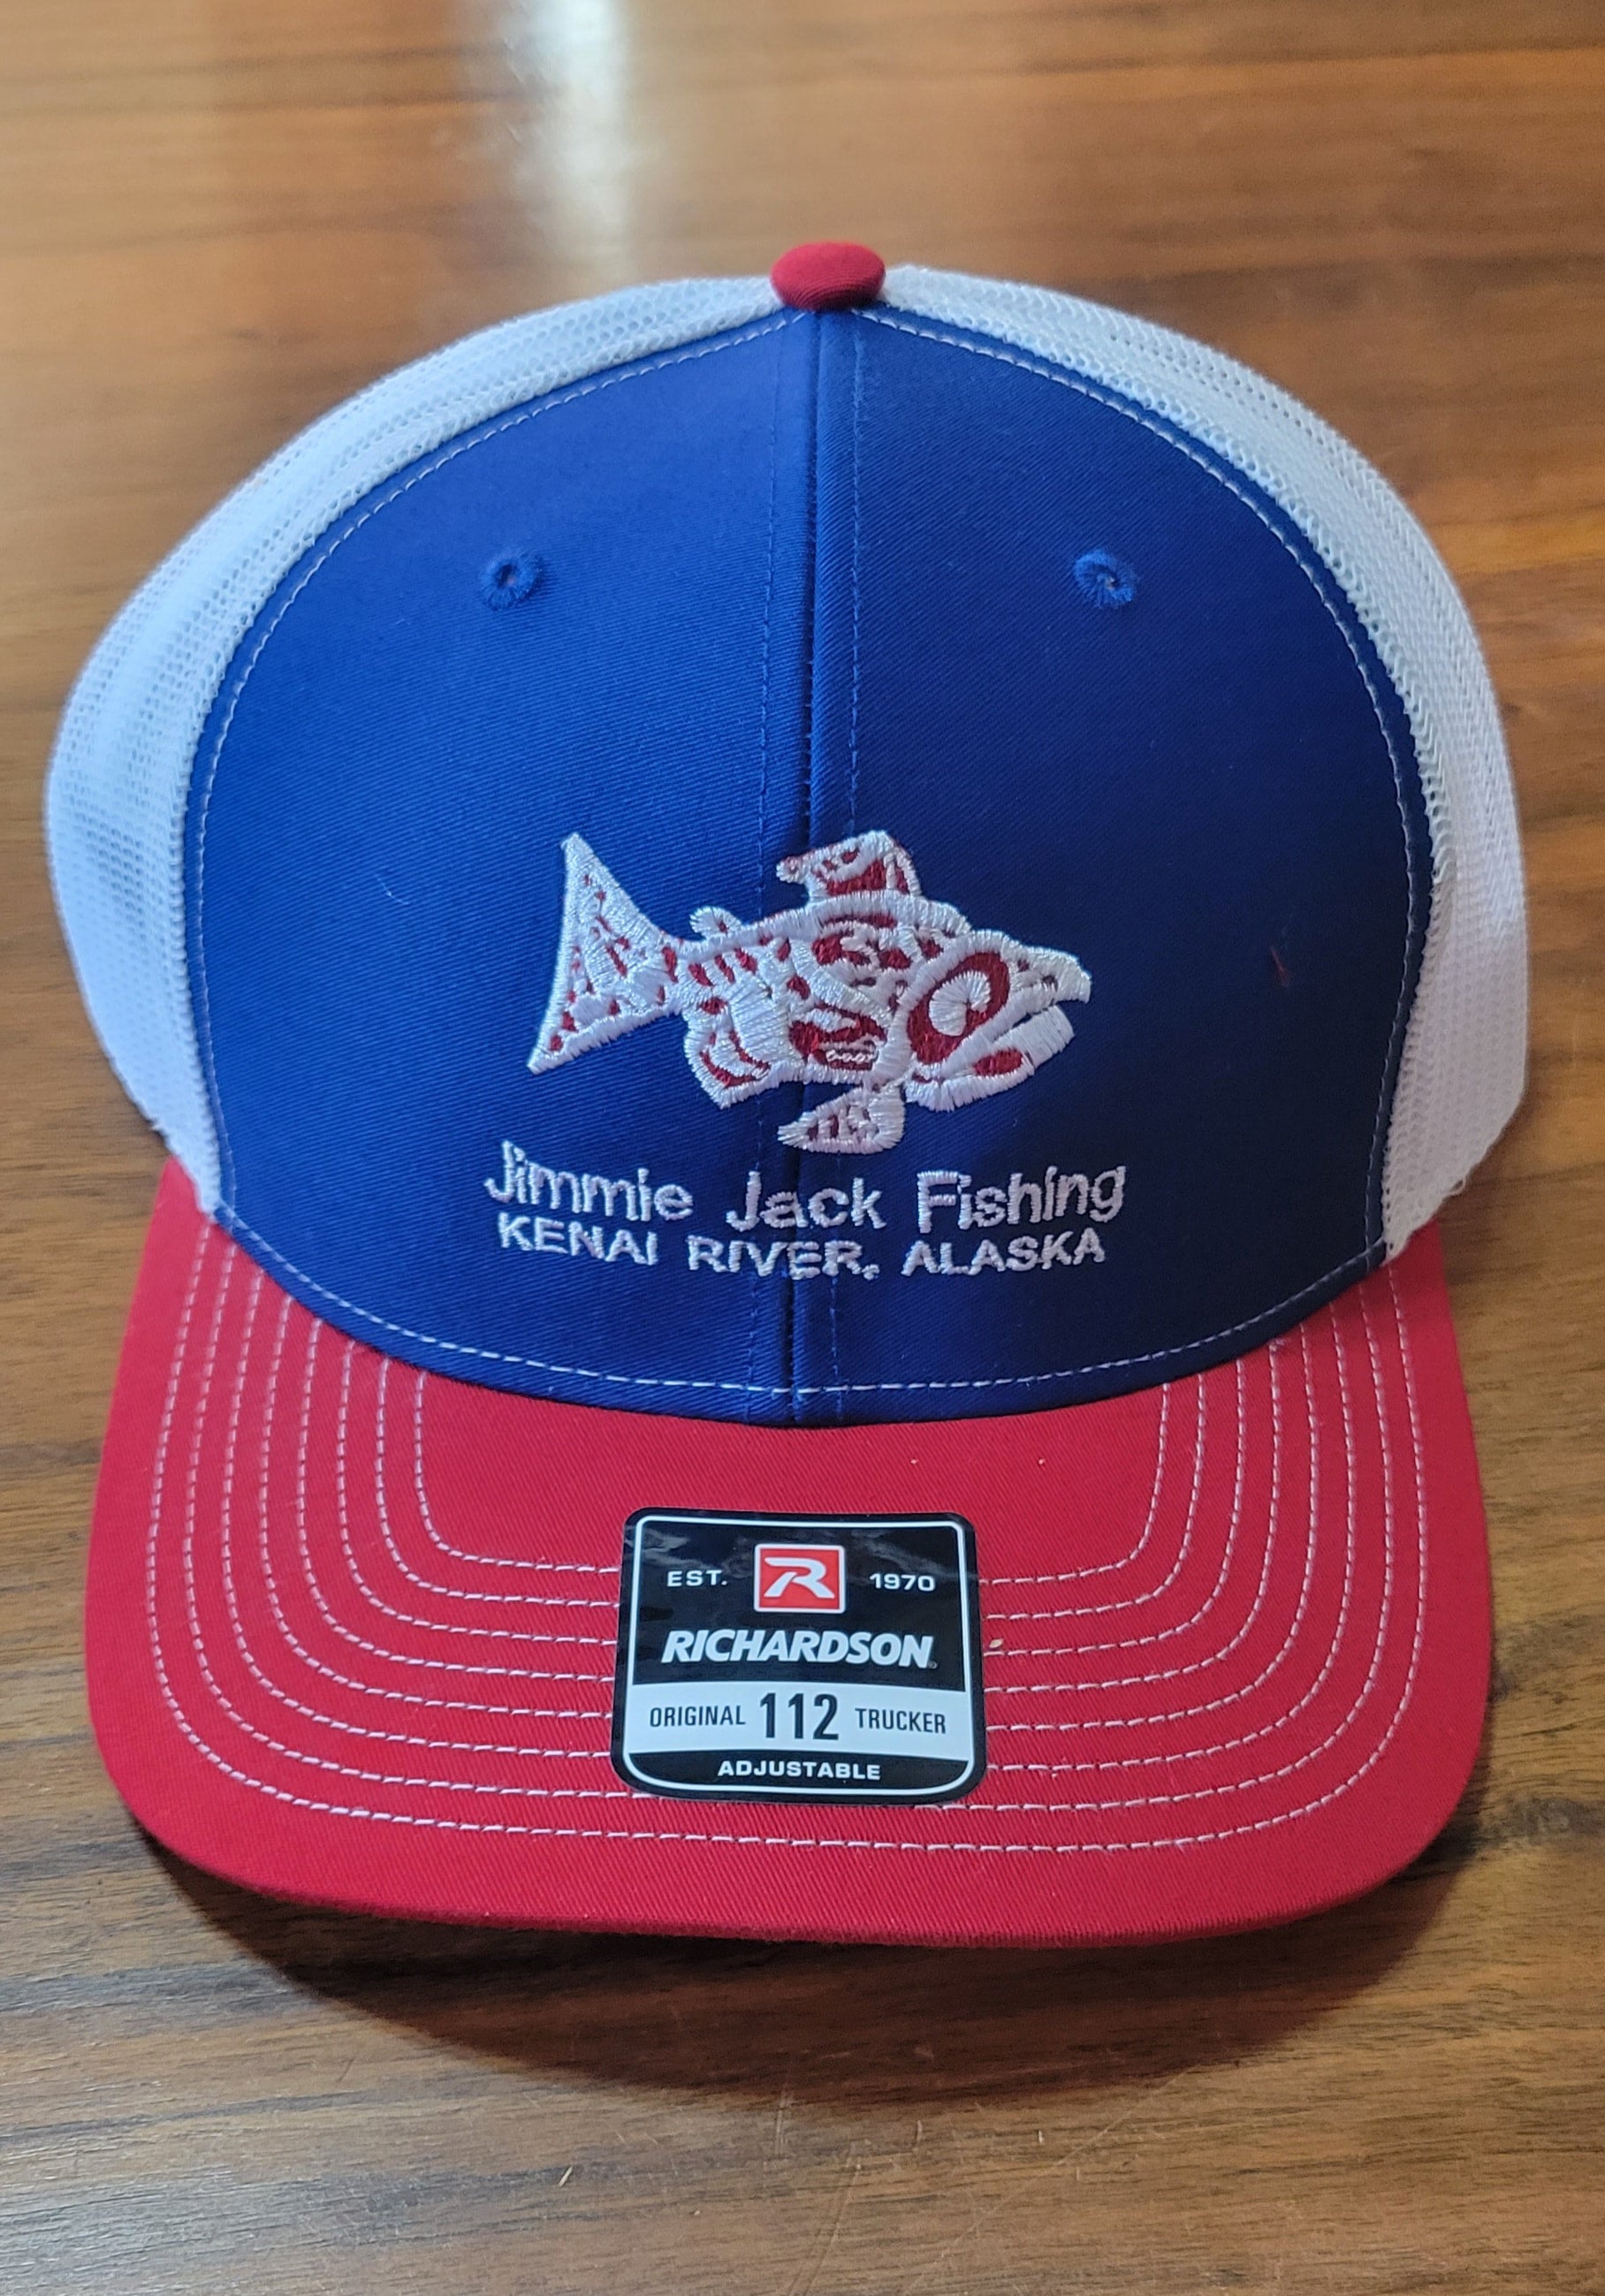 Fishing Clothing Brands Archives - Jimmie Jack Fishing